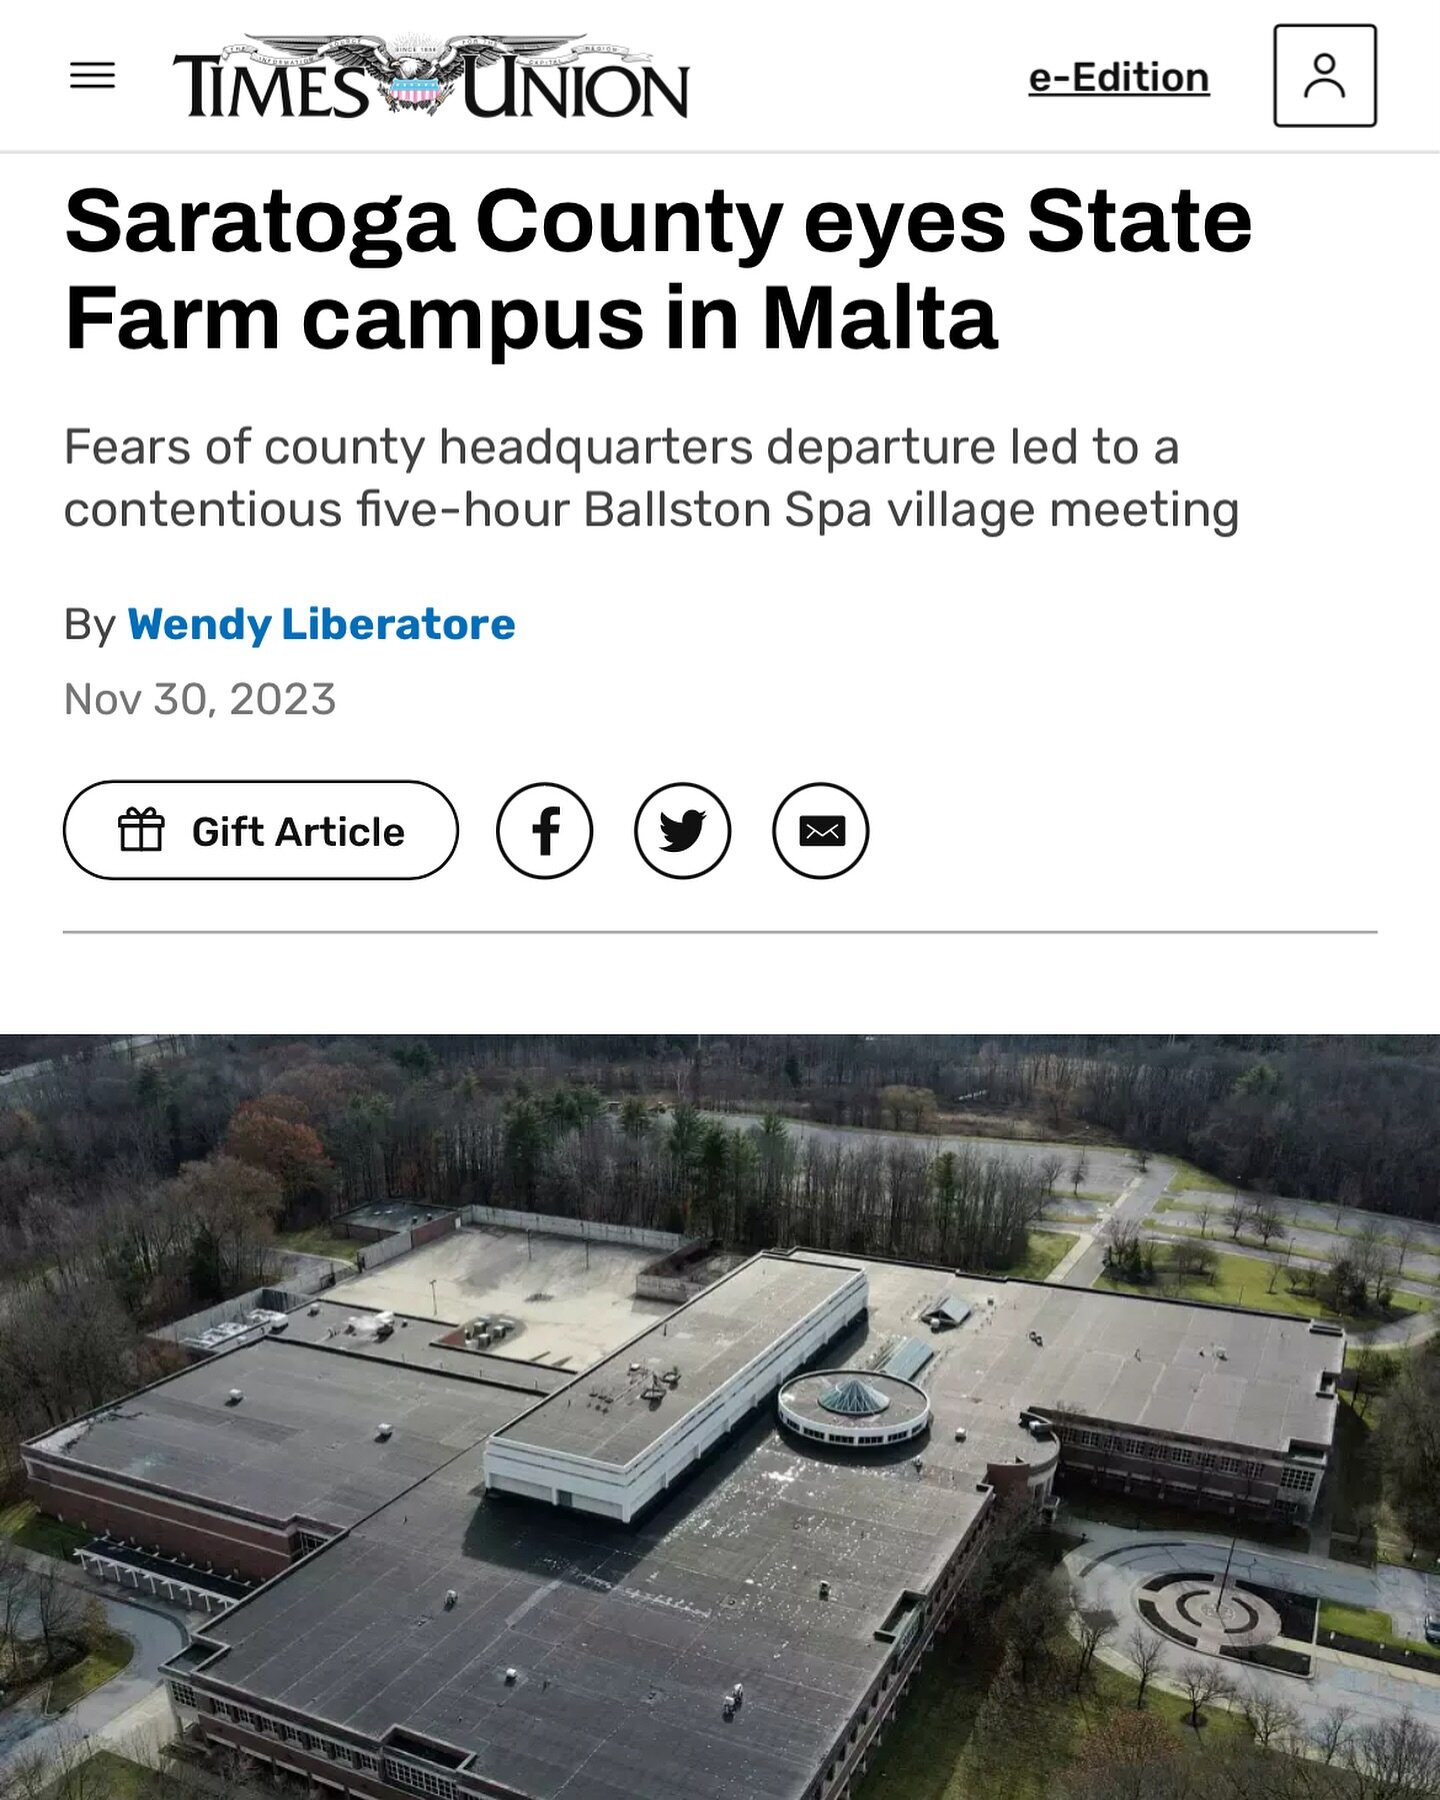 🚨📰Saratoga County eyes State Farm campus in Malta. Fears of county headquarters departure led to a contentious five-hour Ballston Spa village meeting 
By Wendy Liberatore, Nov 30, 2023:

&ldquo;BALLSTON SPA &mdash; The Saratoga County Board of Supe